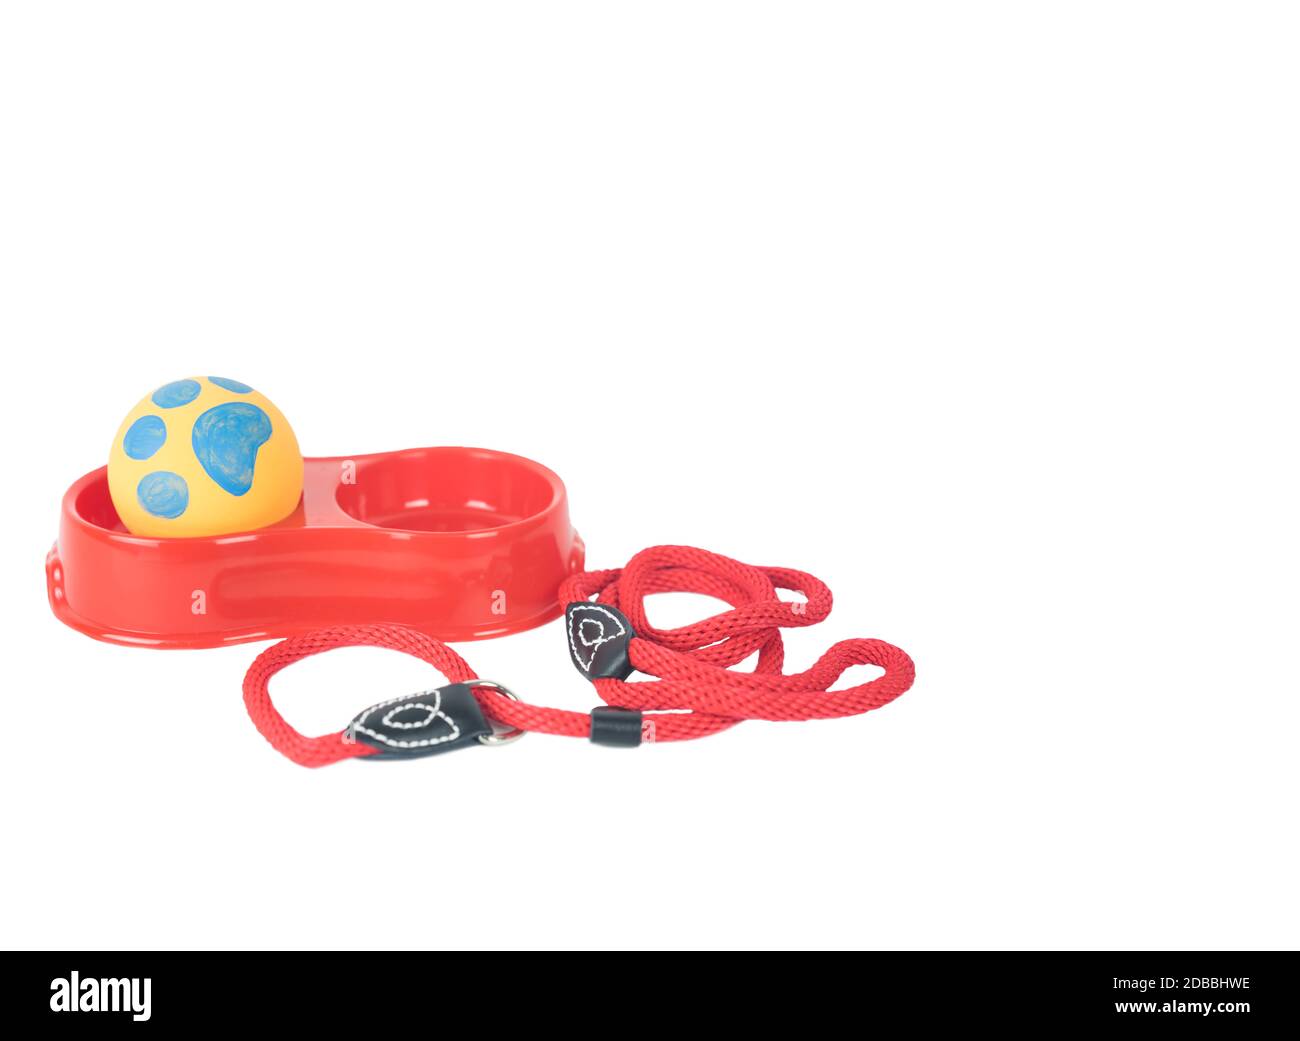 Pet toy in bowl and leashes on isolated white background.  Pet accessories concept Stock Photo